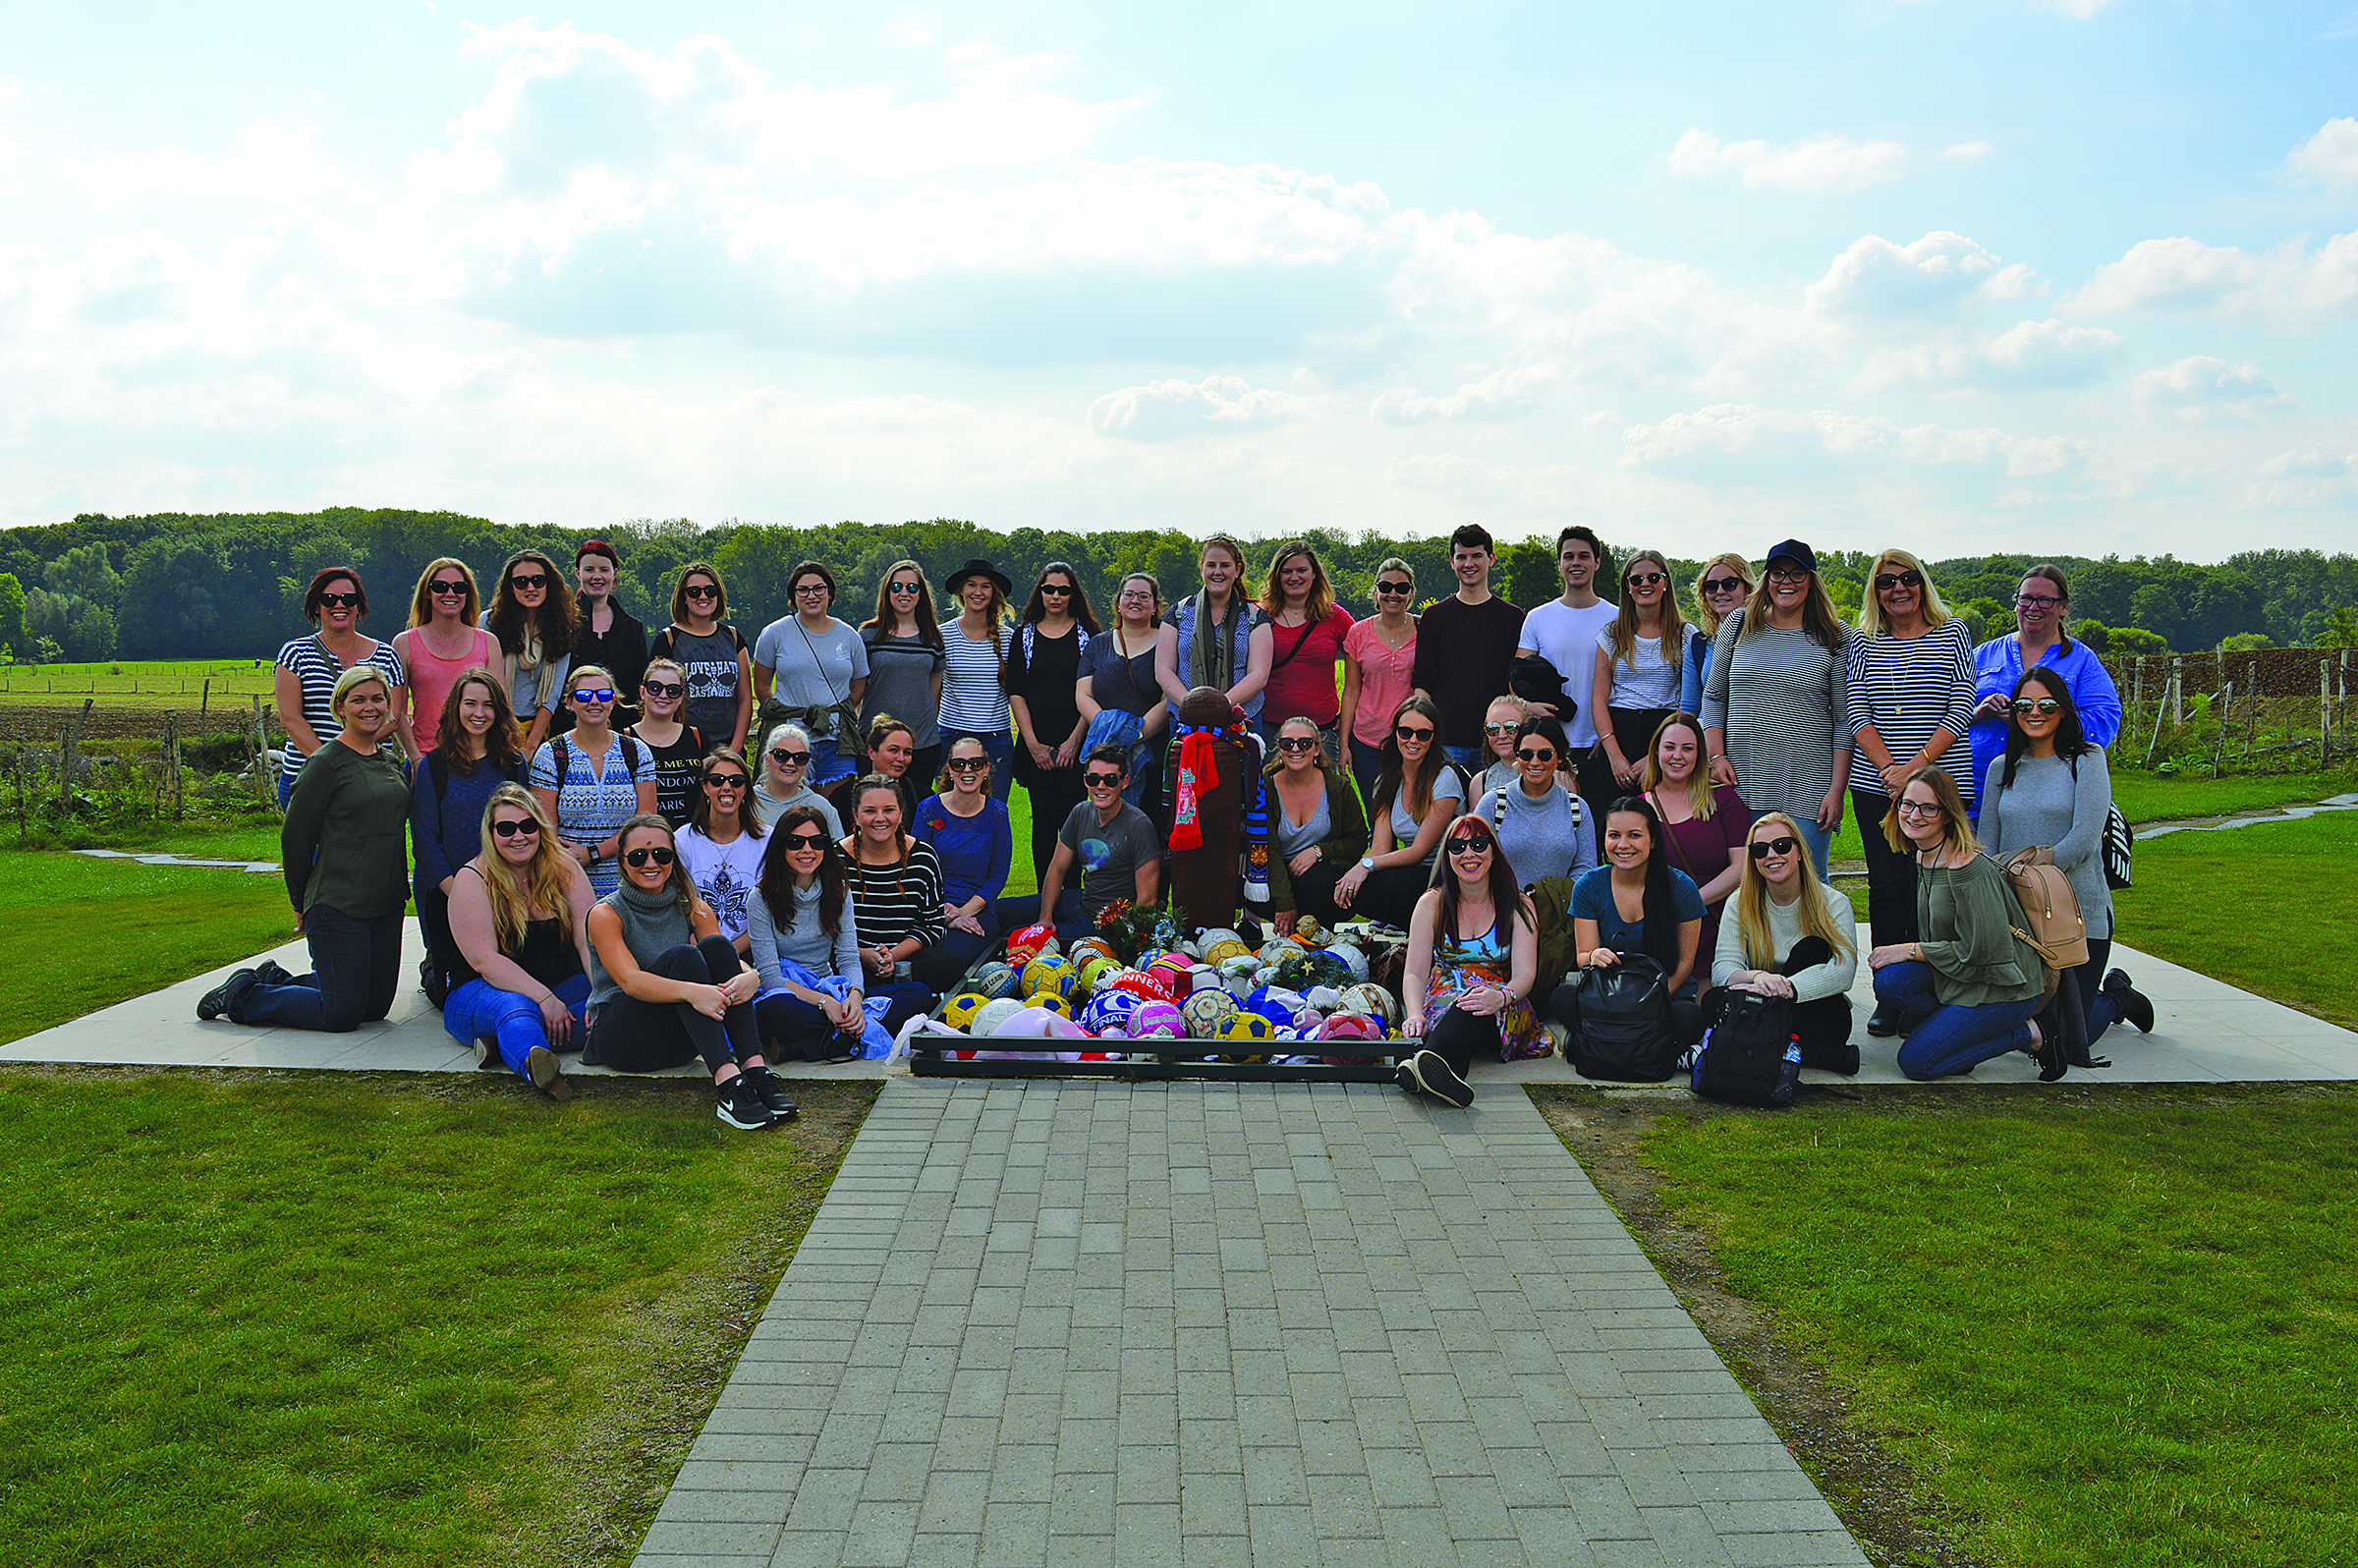 University of Newcastle Study Tour at the site of the 1914 Christmas Truce